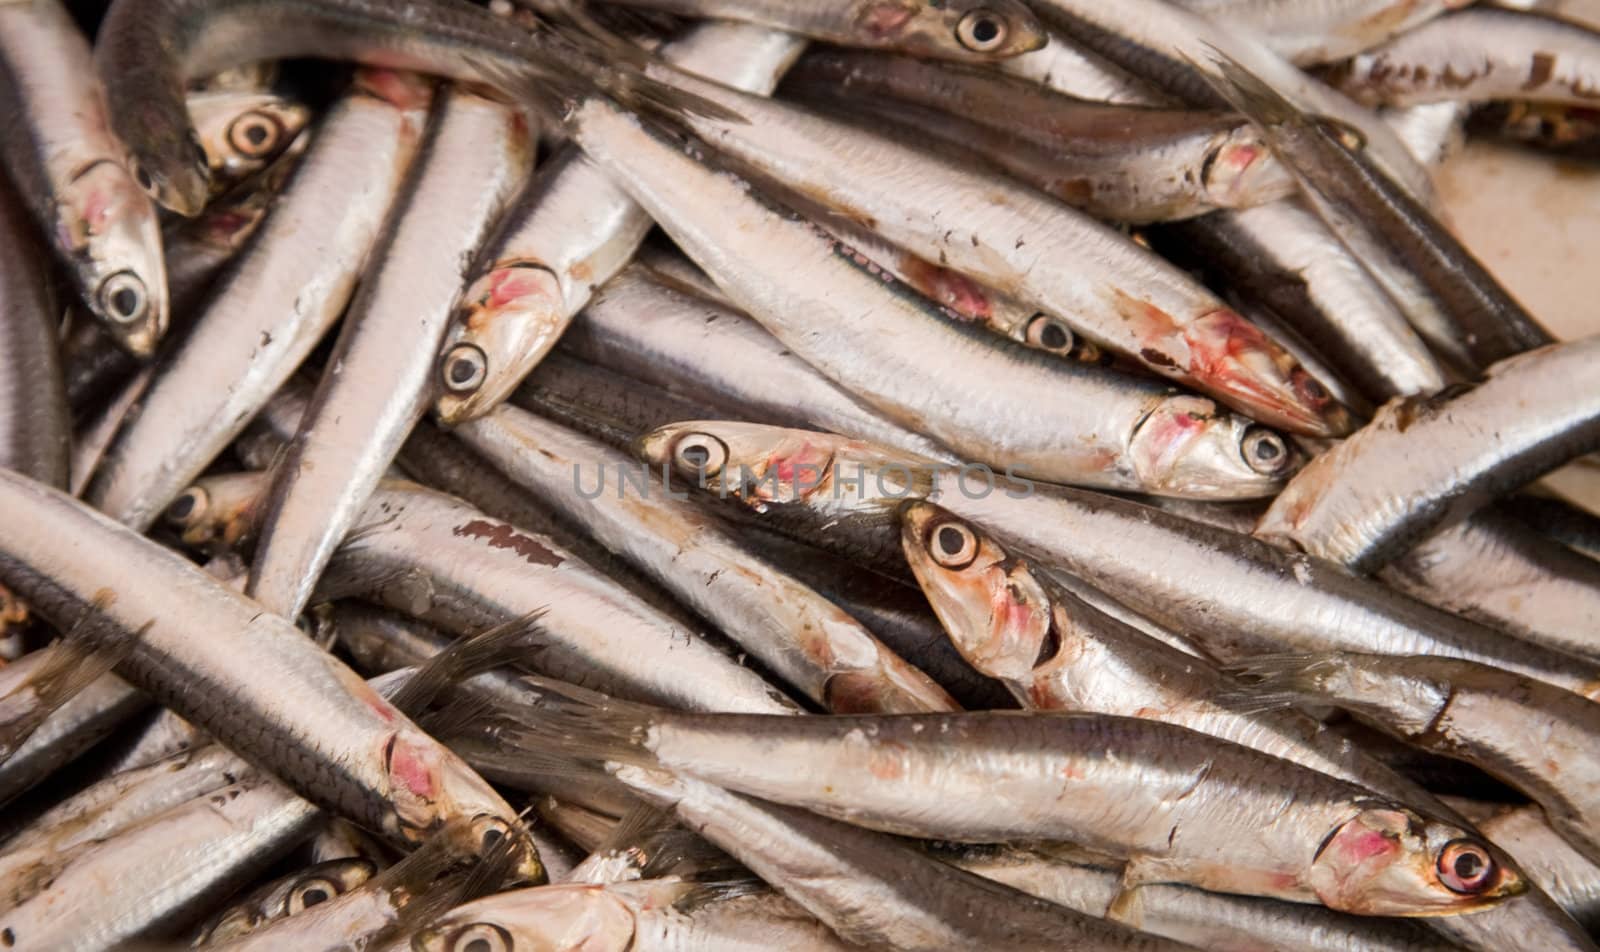 Anchovies on a fresh fish market stall.